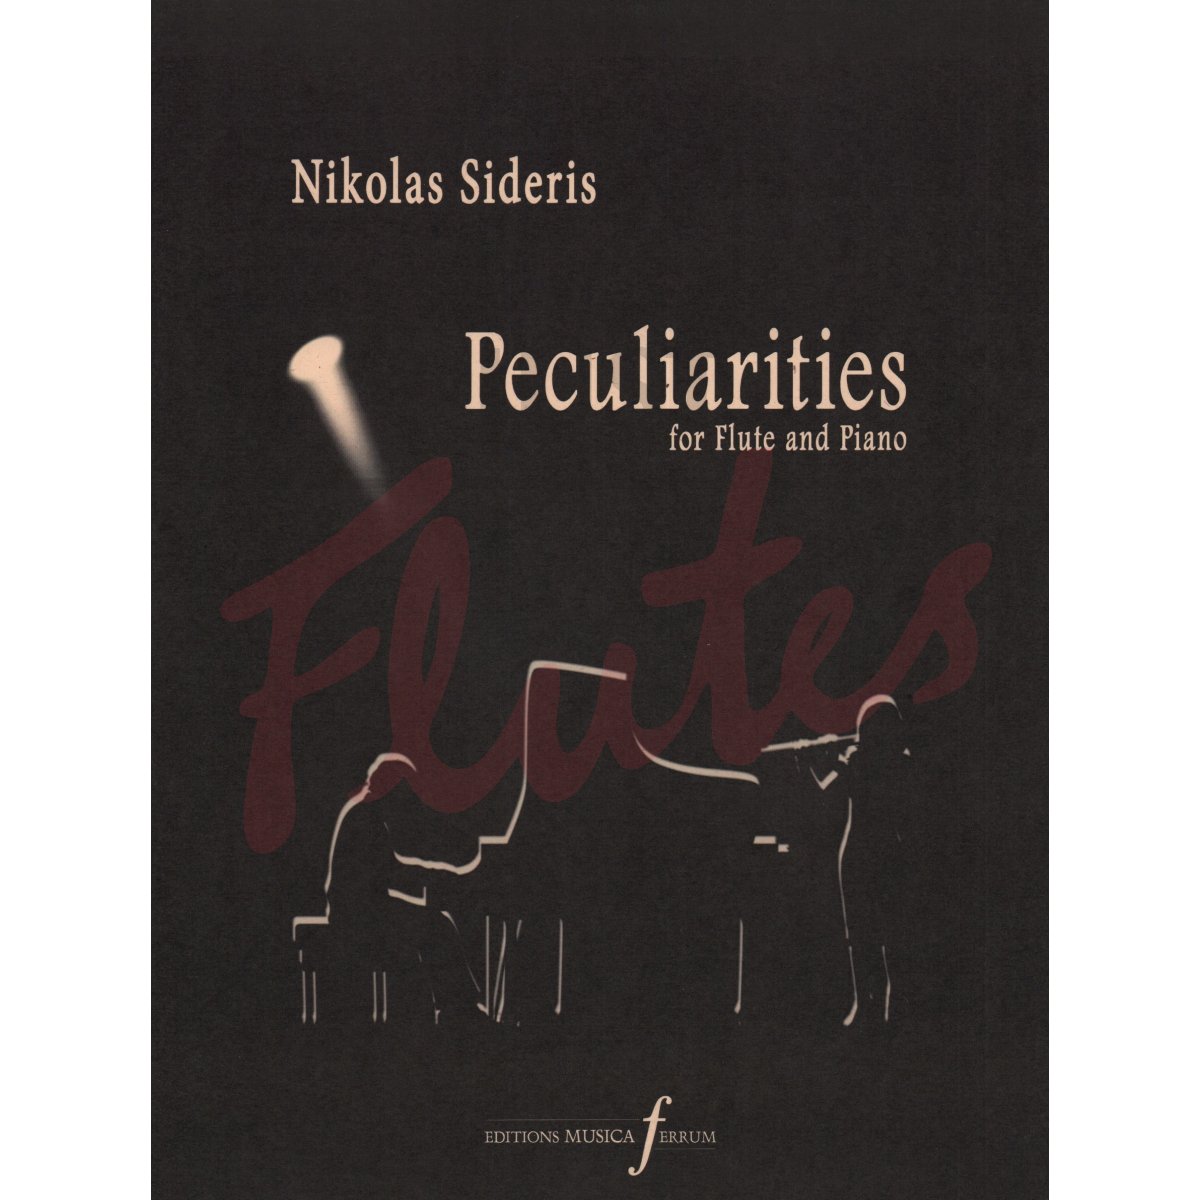 Peculiarities for Flute and Piano